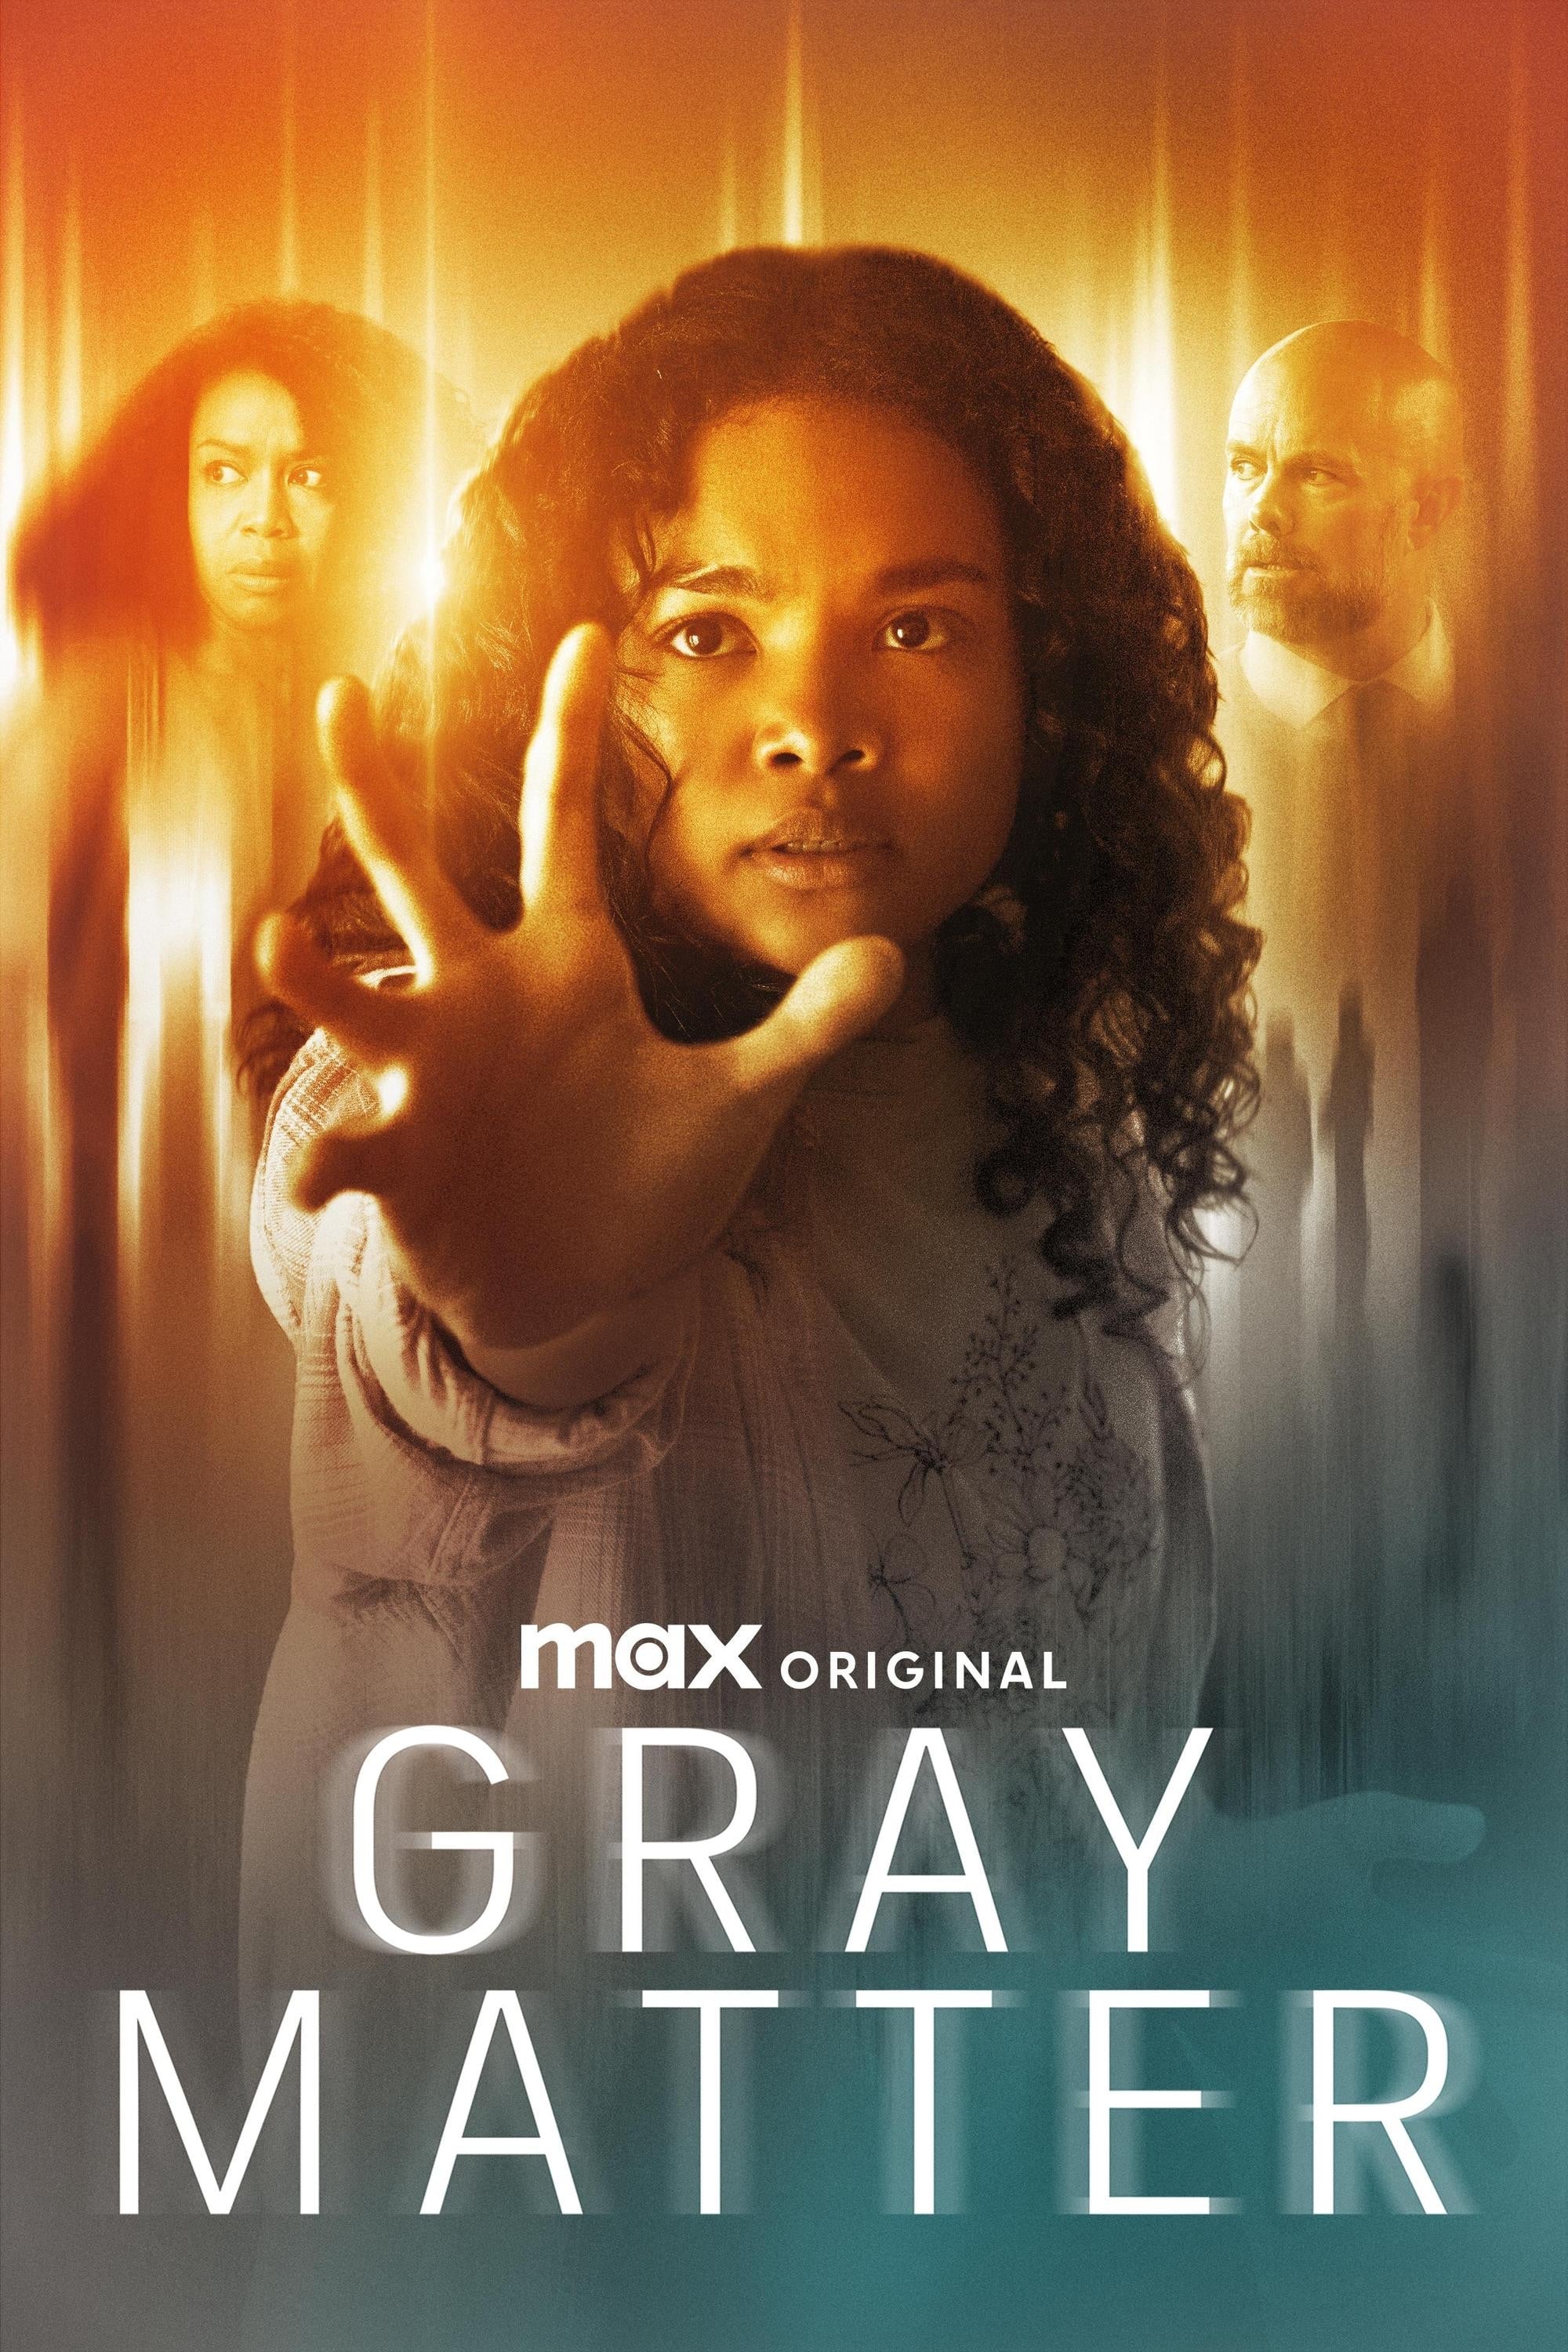 WATCH ⬜ Gray Matter (2023) FULLMOVIE ONLINE FREE ENGLISH/Dub/SUB Science Fiction STREAMINGS Movie Poster